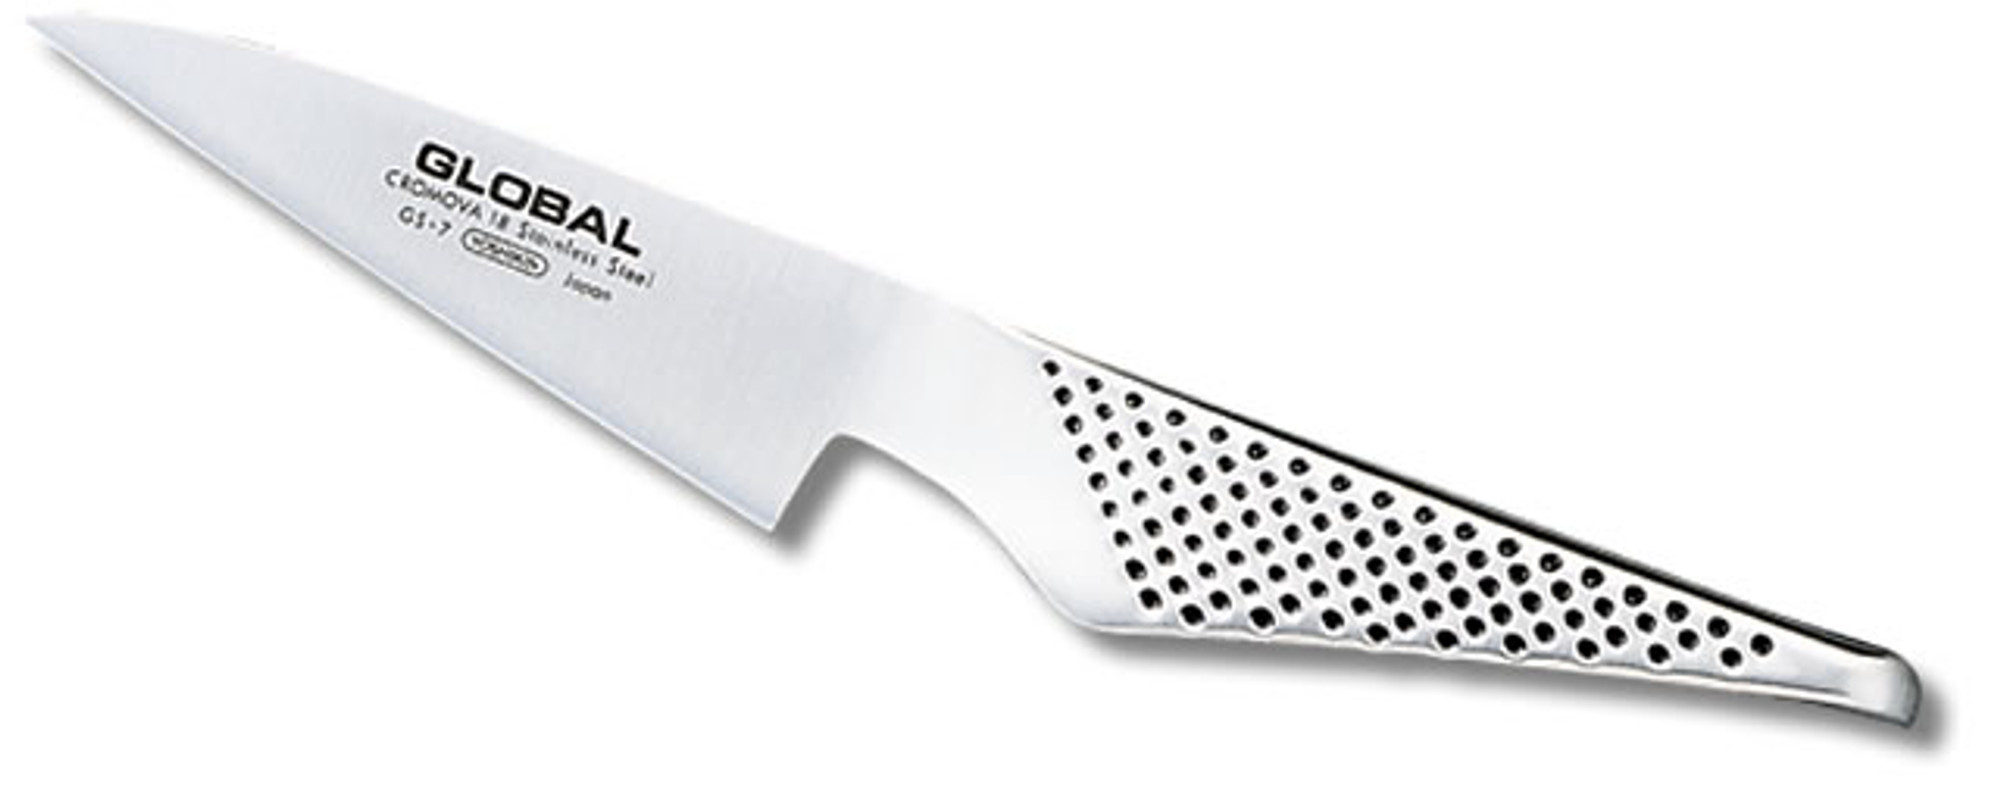 Global GS-7 4" Spear Point Paring Knife